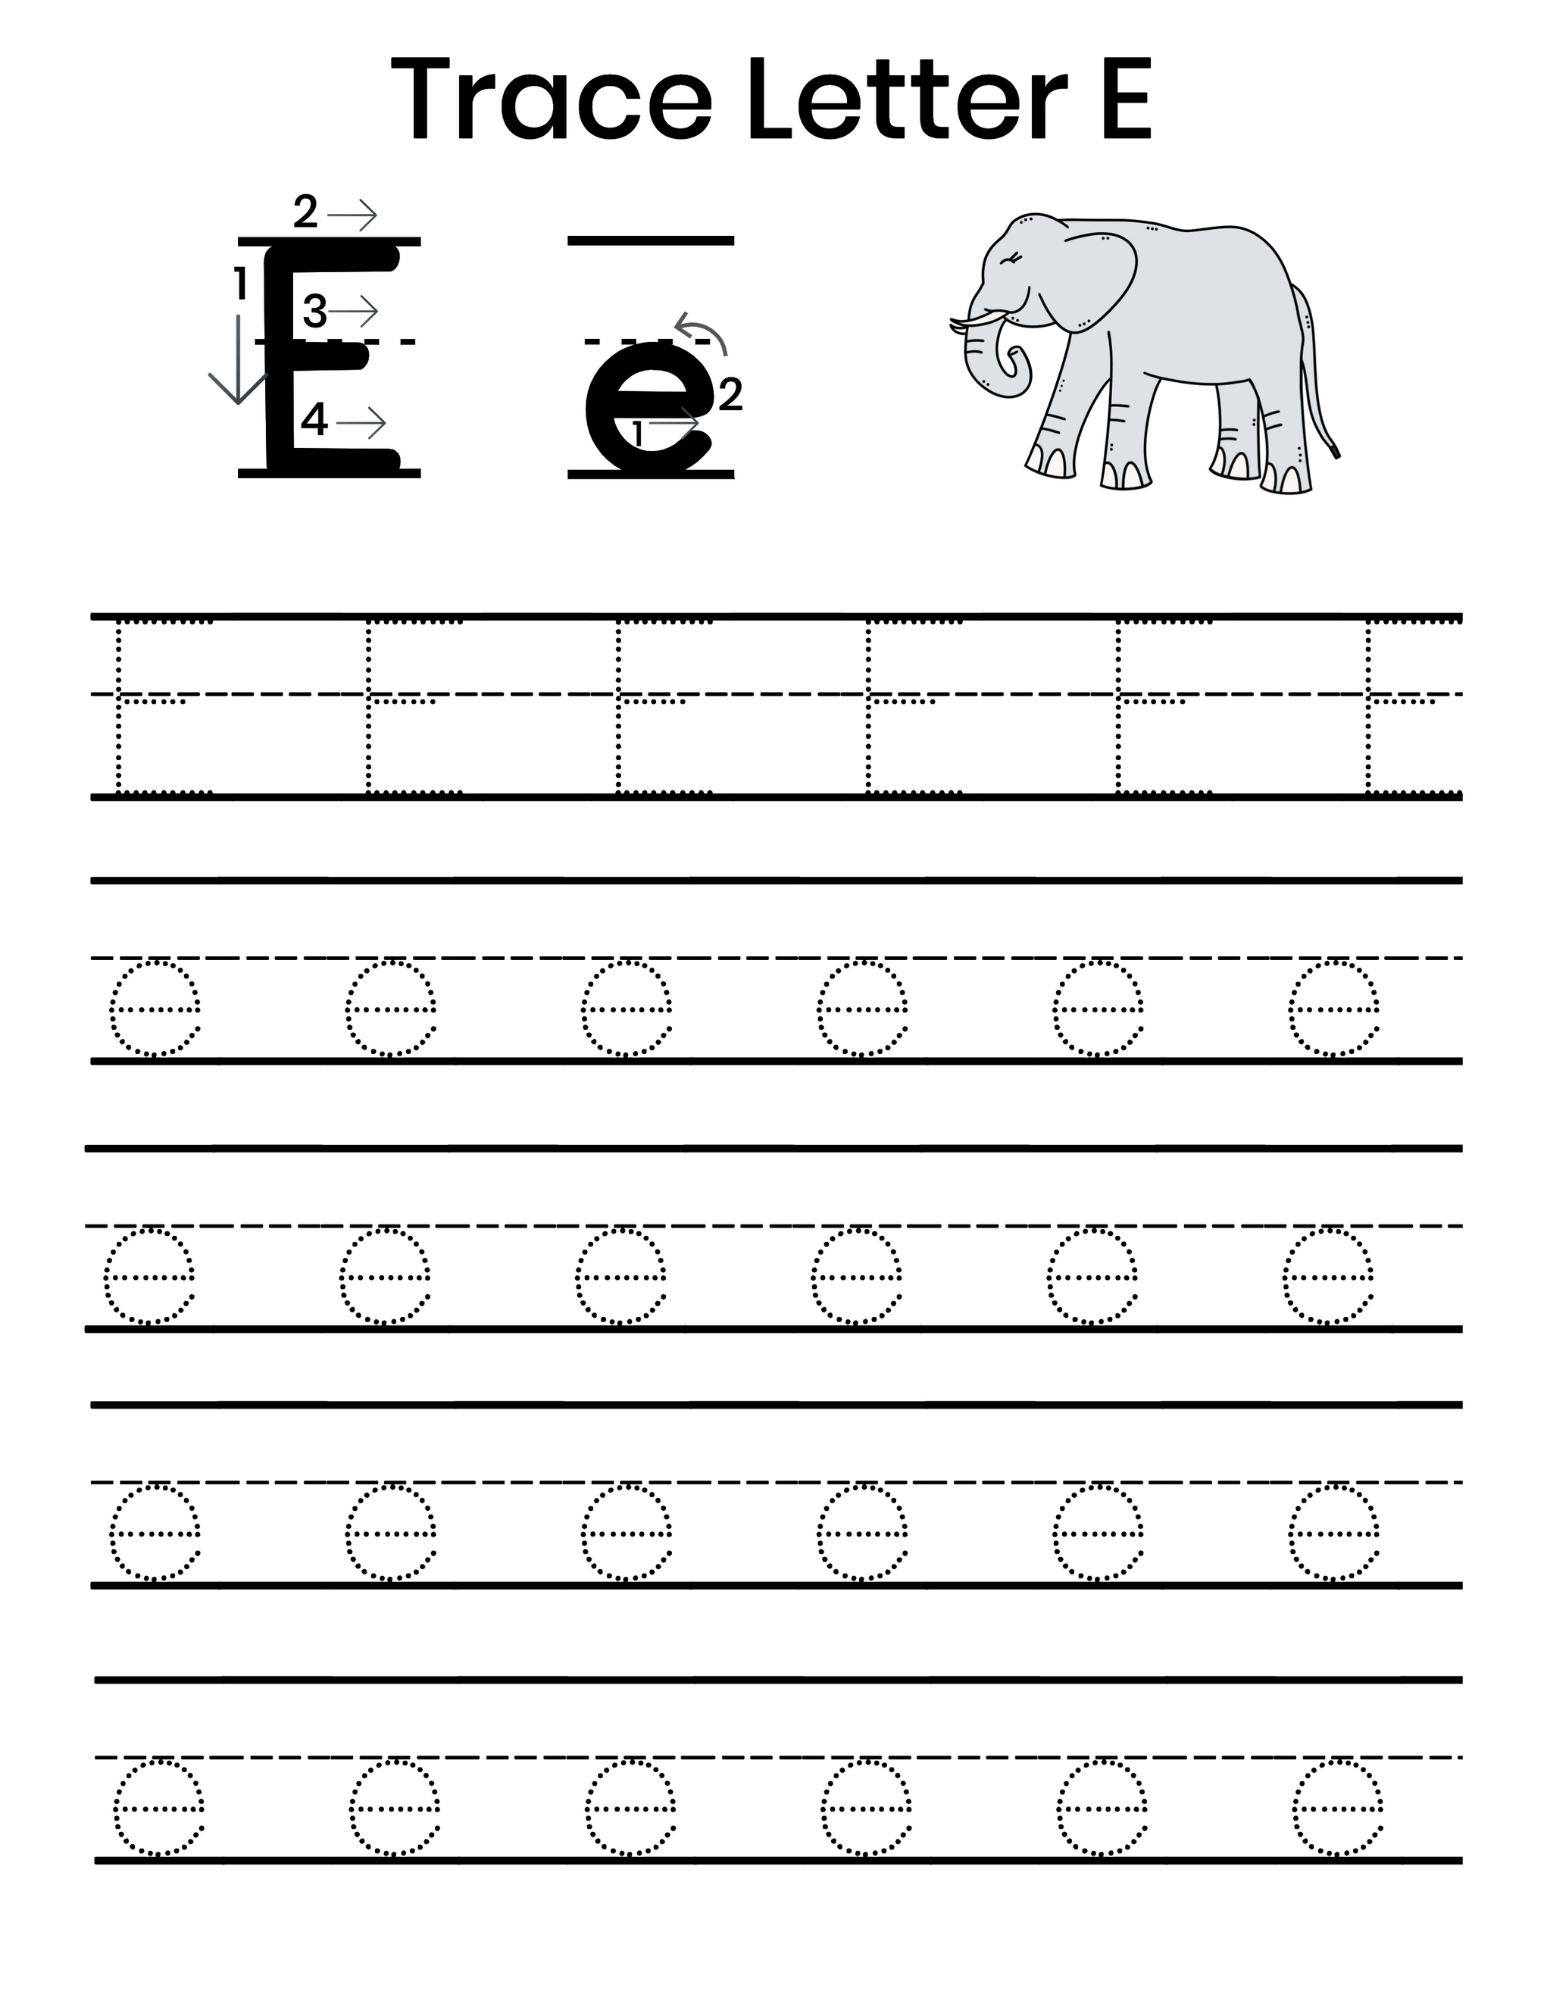 letter-e-tracing-worksheets-free-download-goodimg-co